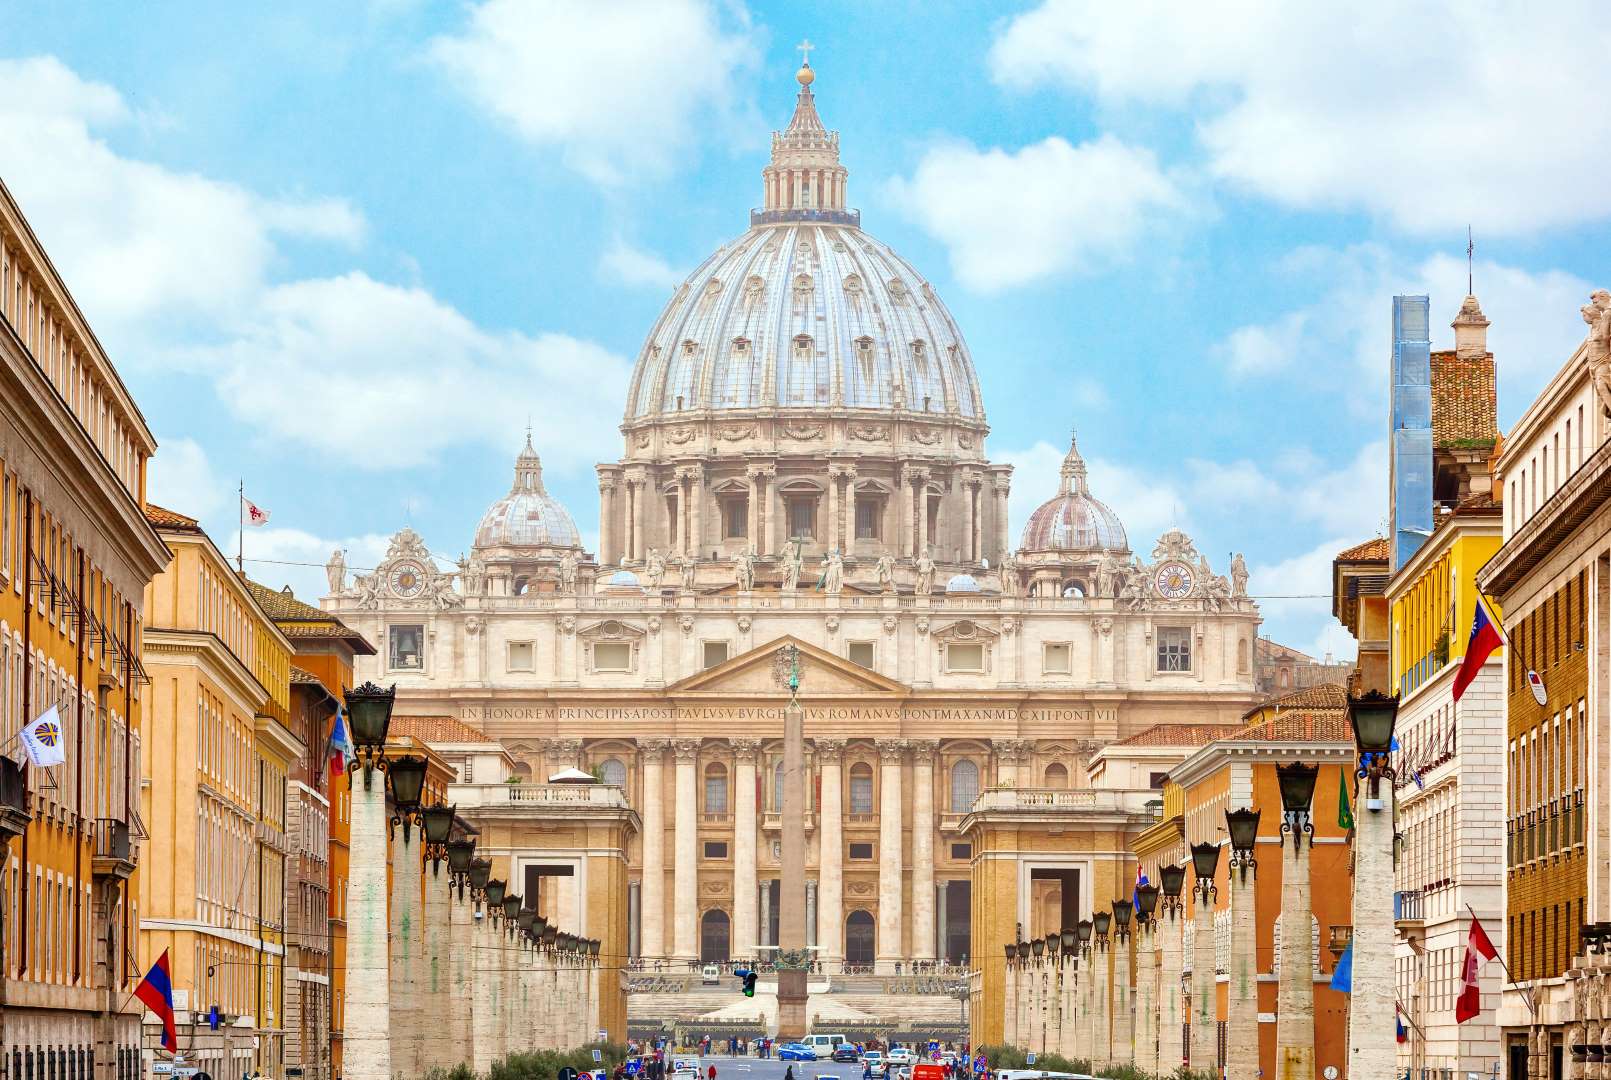 If You Get 20/25 on This Geography True or False Test, You’re Smarter Than 95% Of People St. Peter's Basilica in Vatican City